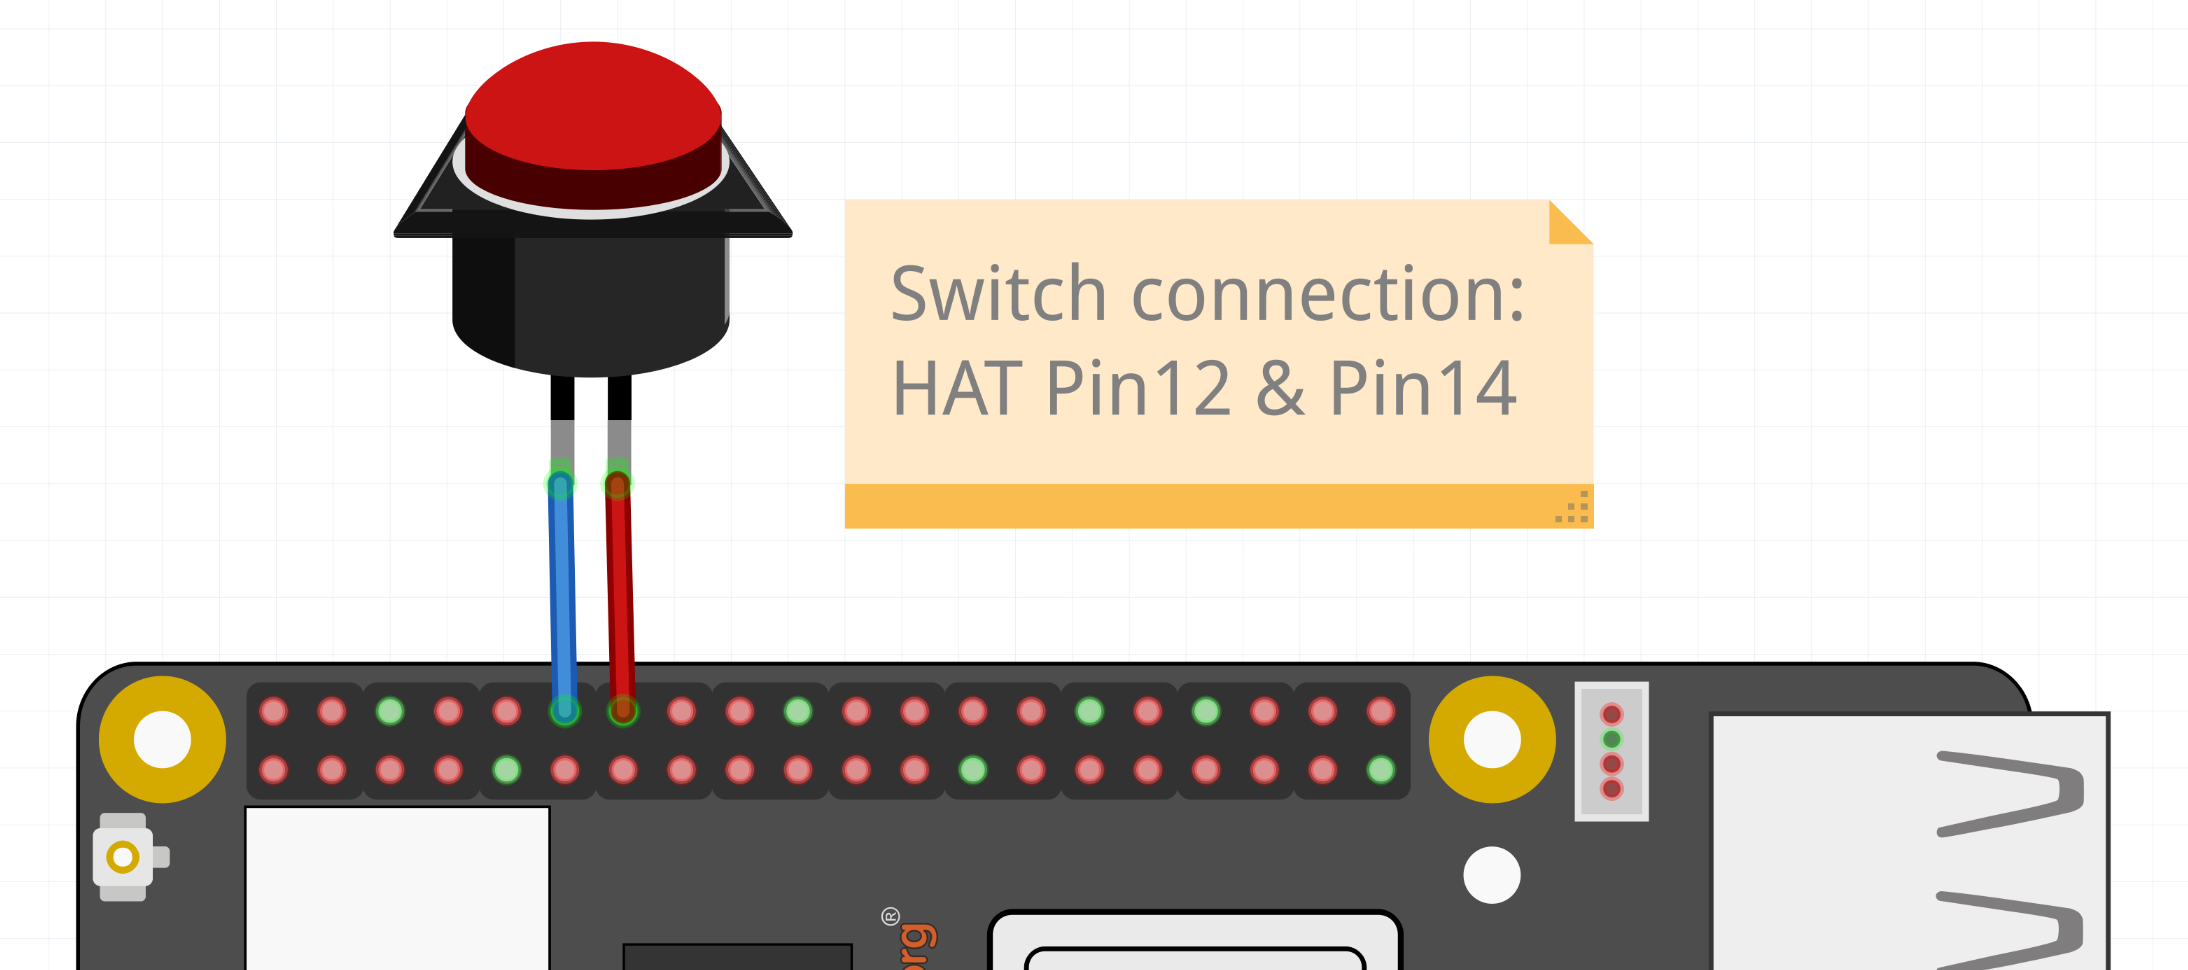 Button connected to HAT Pin12